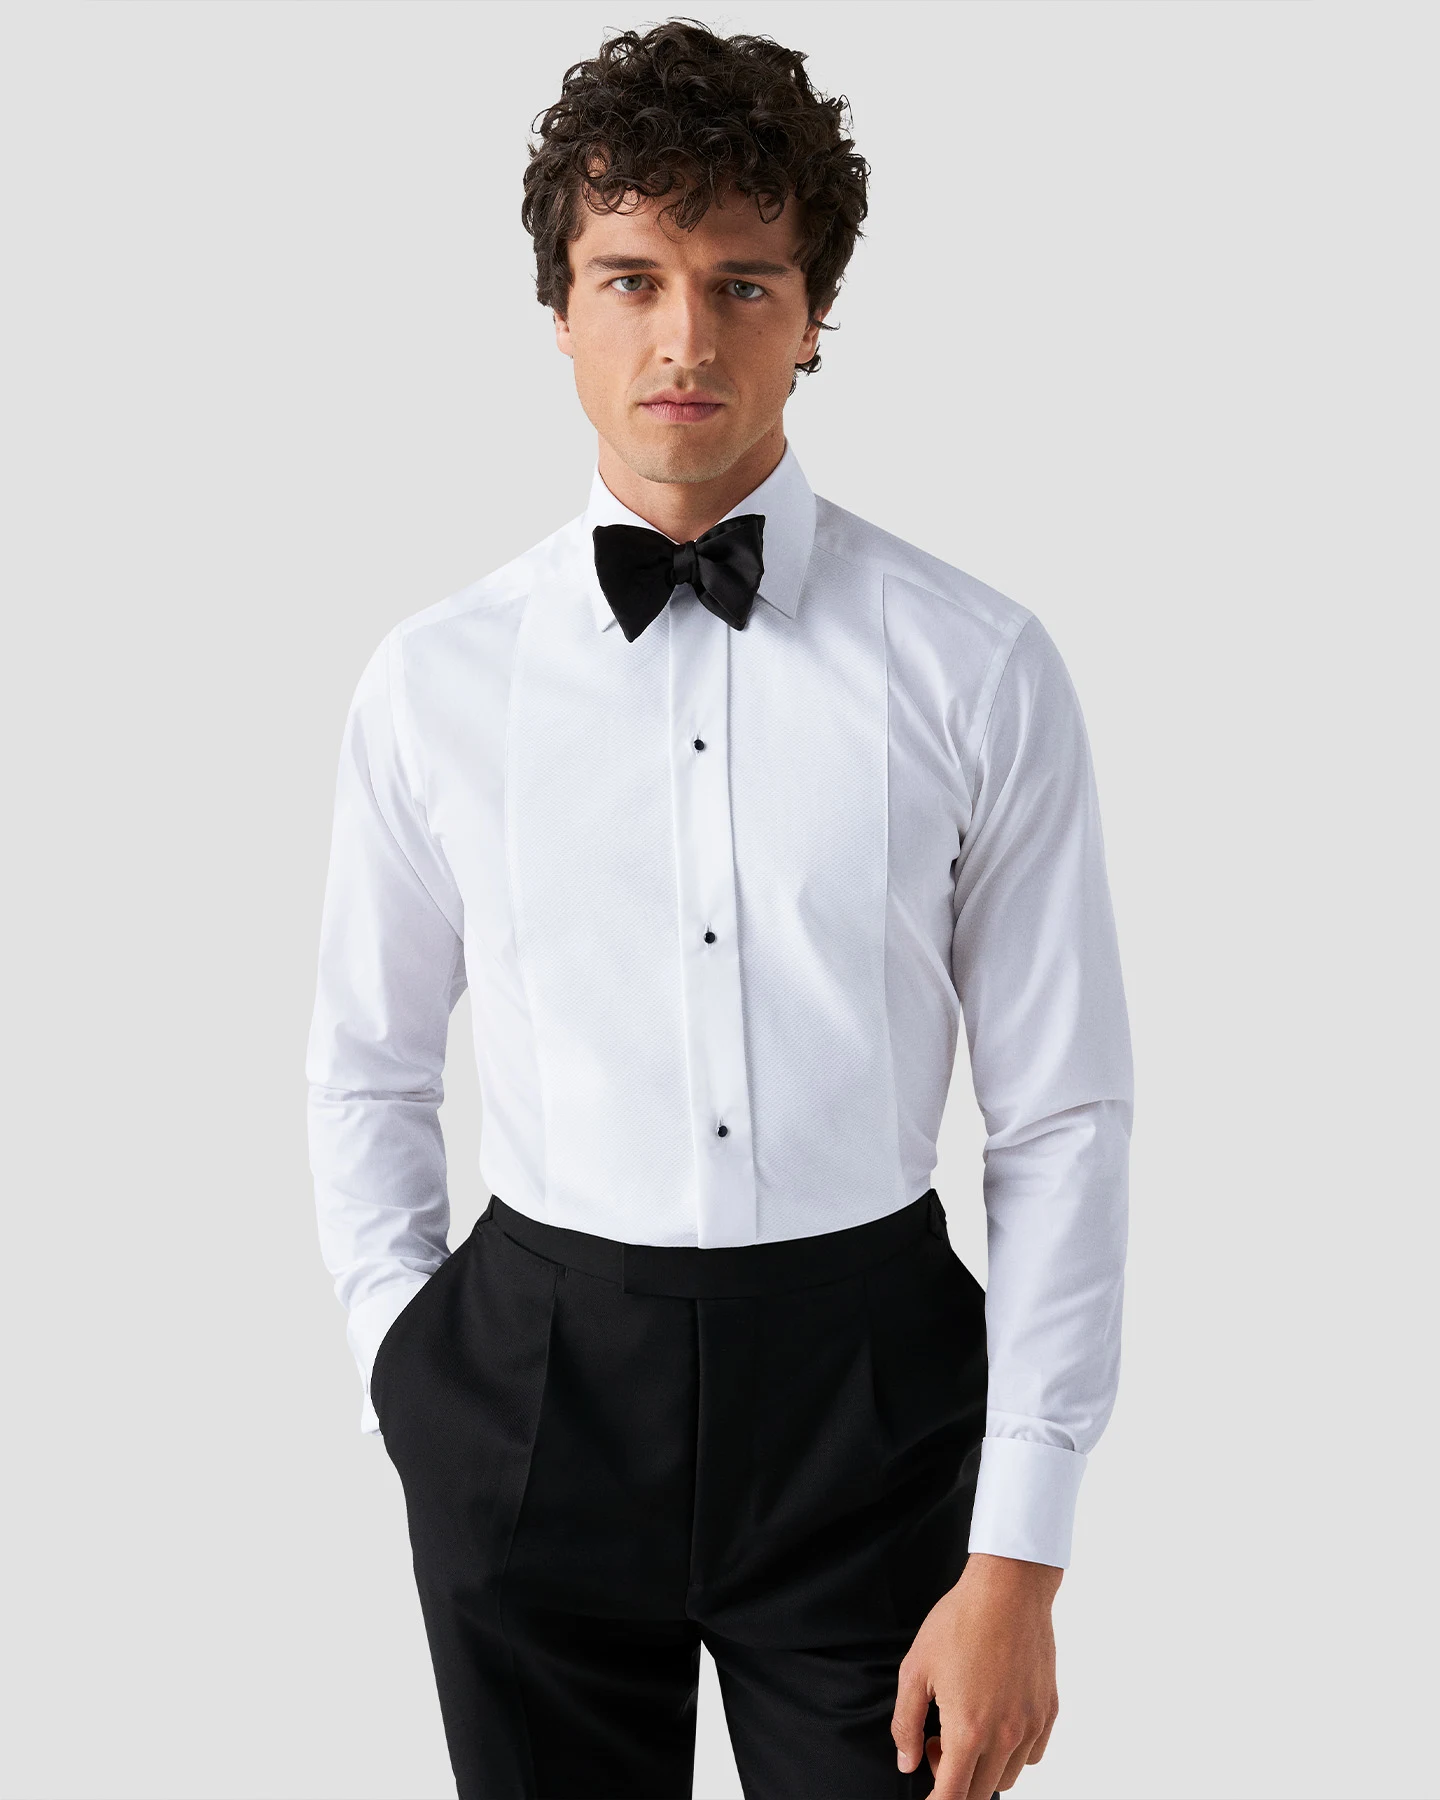 model with tuxedo shirt and bowtie